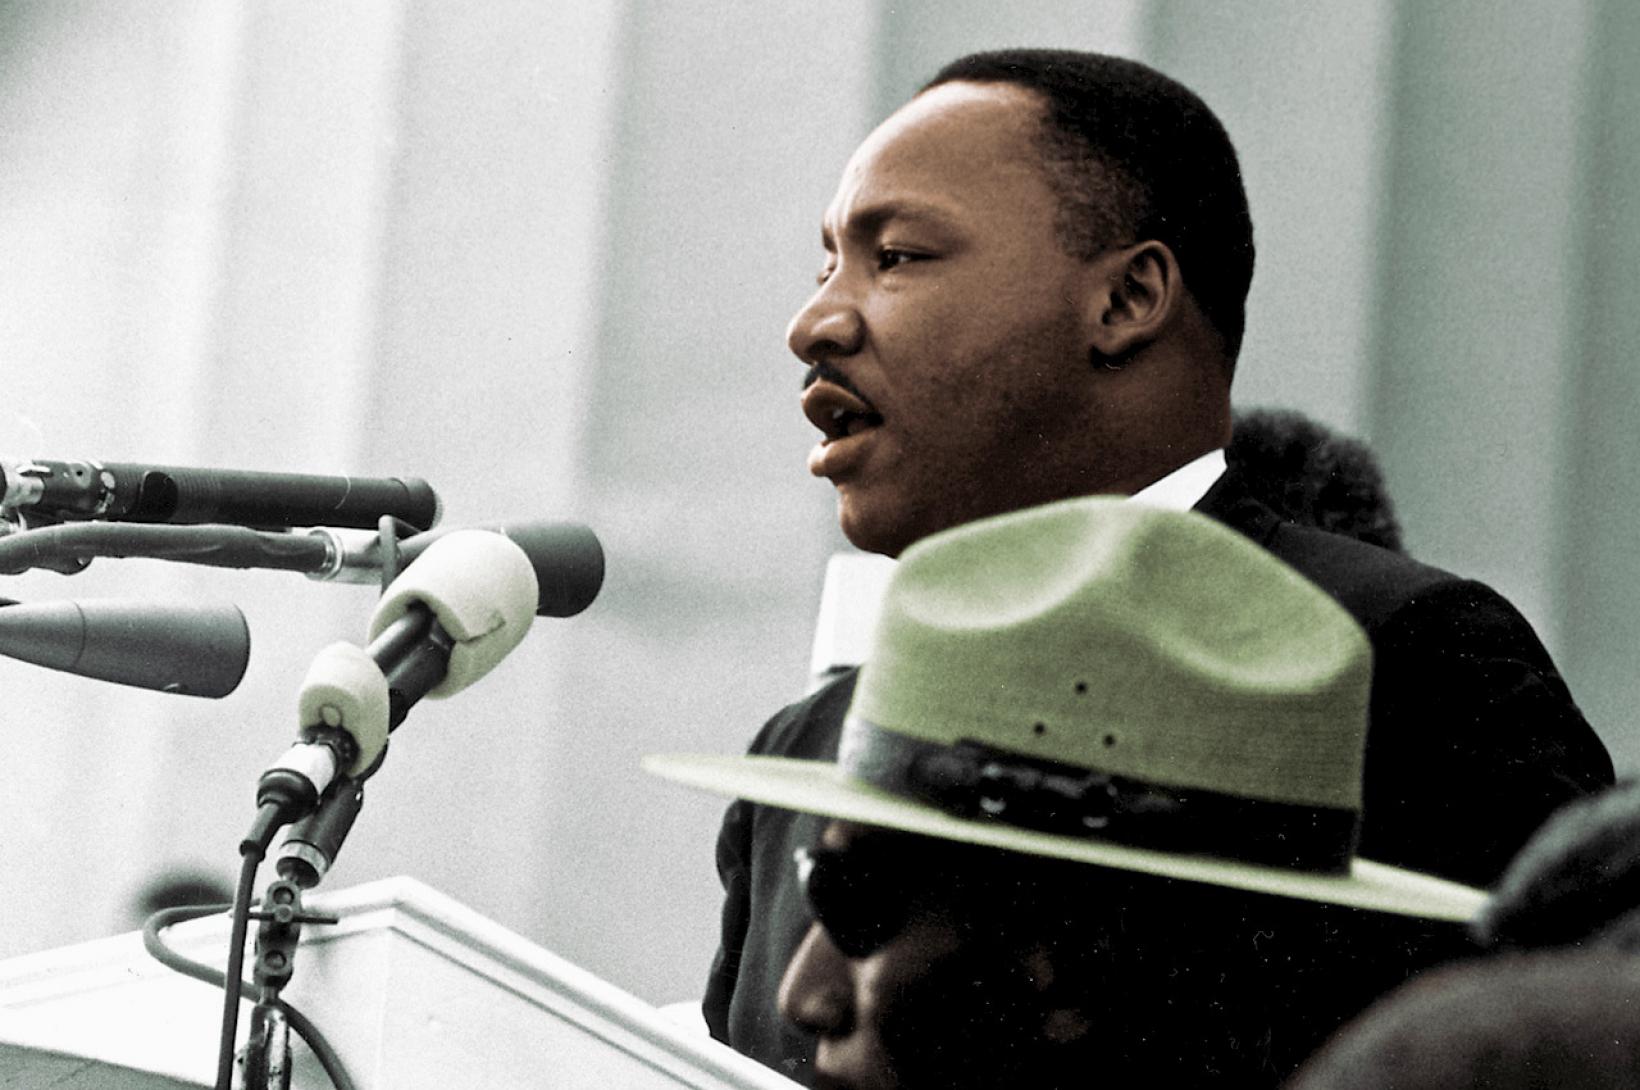 Dr. Martin Luther King, Jr. delivering his I Have a Dream Speech at the Civil Rights March on Washington, D.C. 08/28/1963 ARC Identifier 542069 / Local Identifier 306-SSM-4D(107)16 -National Archives.